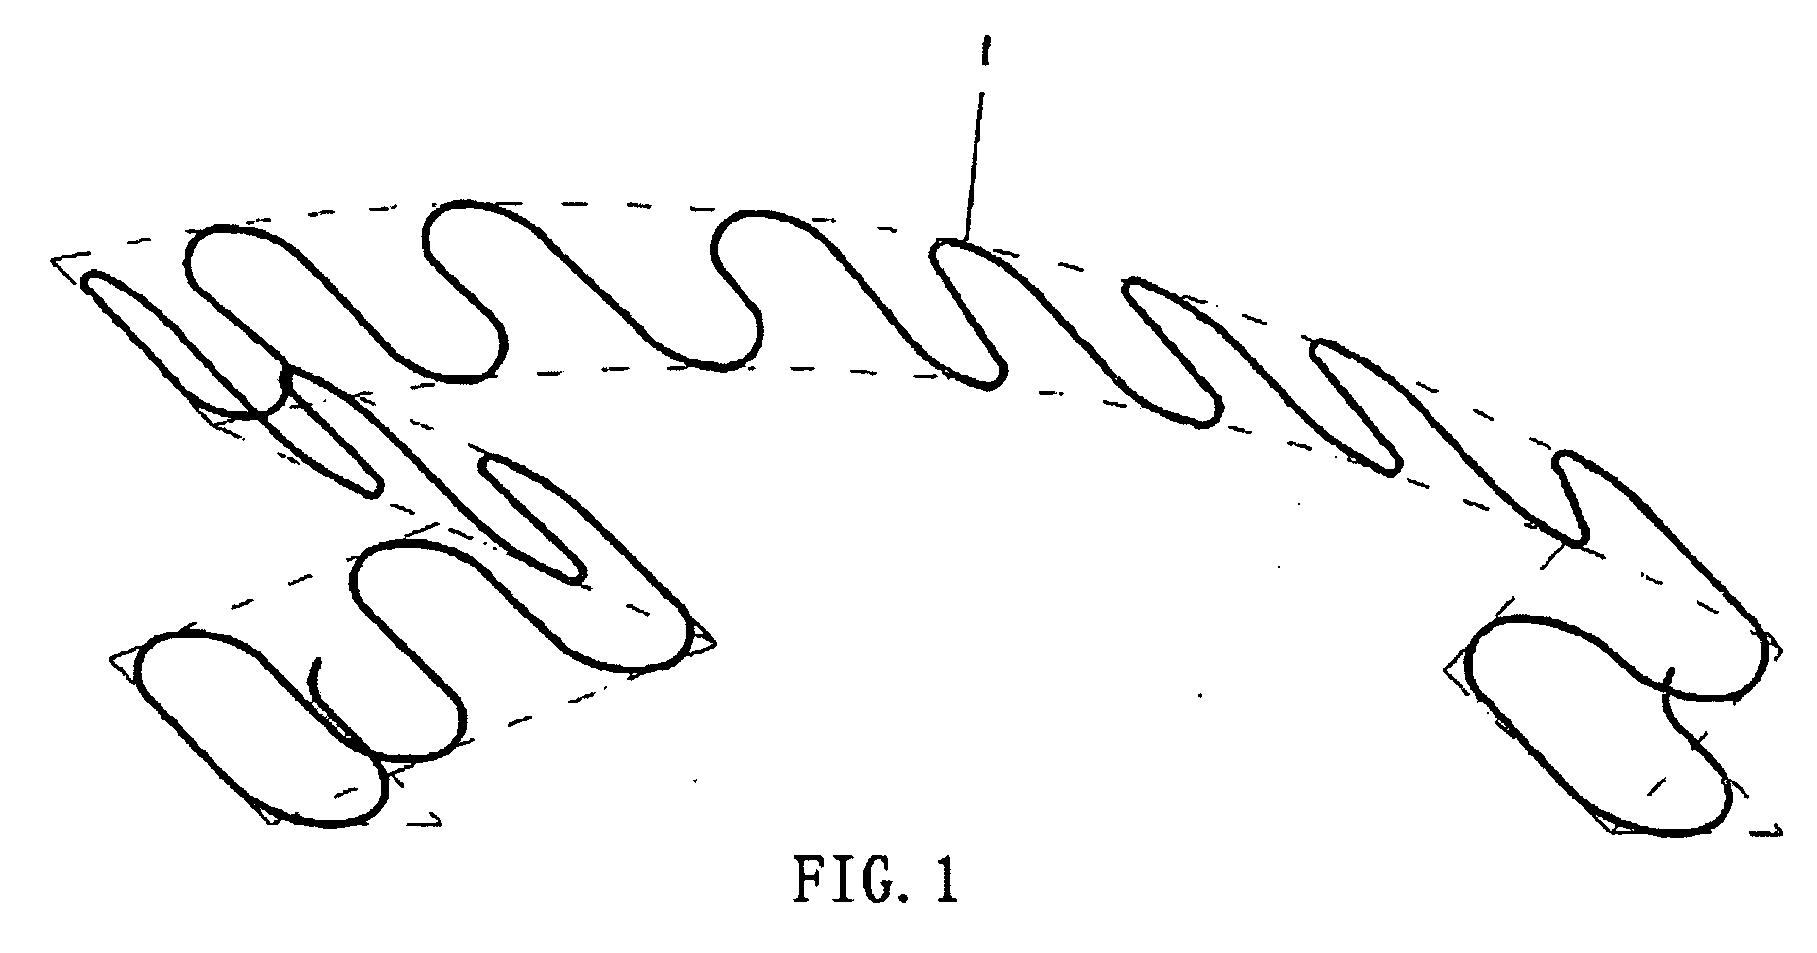 Method of manufacturing the backrest, seat-cushion and armrest of sofa by using bow-shaped springs